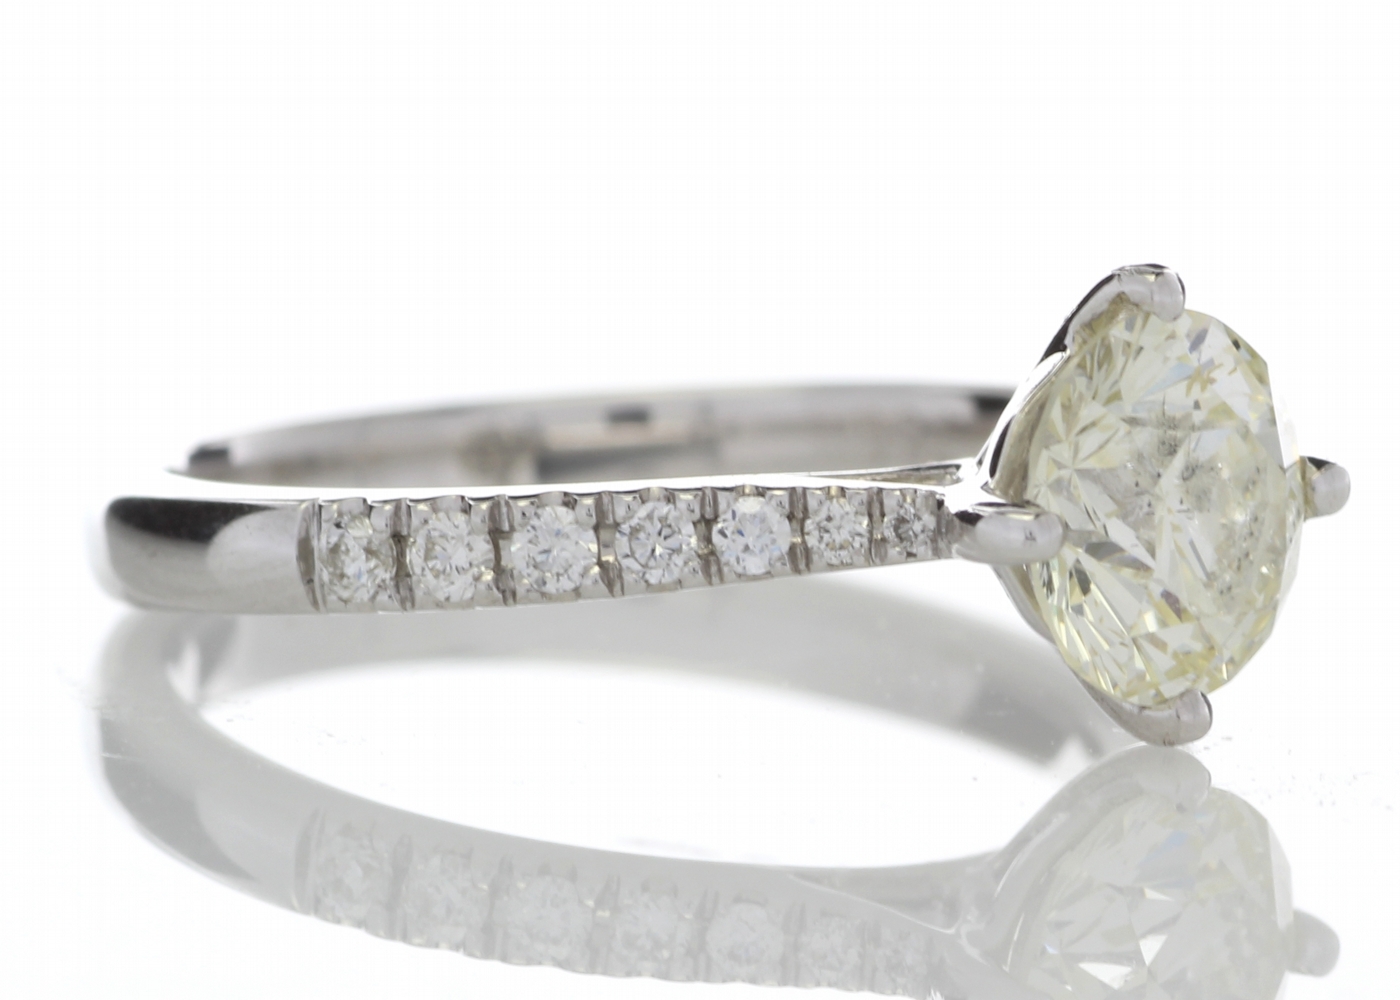 18ct White Gold Solitaire Diamond Ring With Stone Set Shoulders (1.15) 1.30 Carats - Image 4 of 5